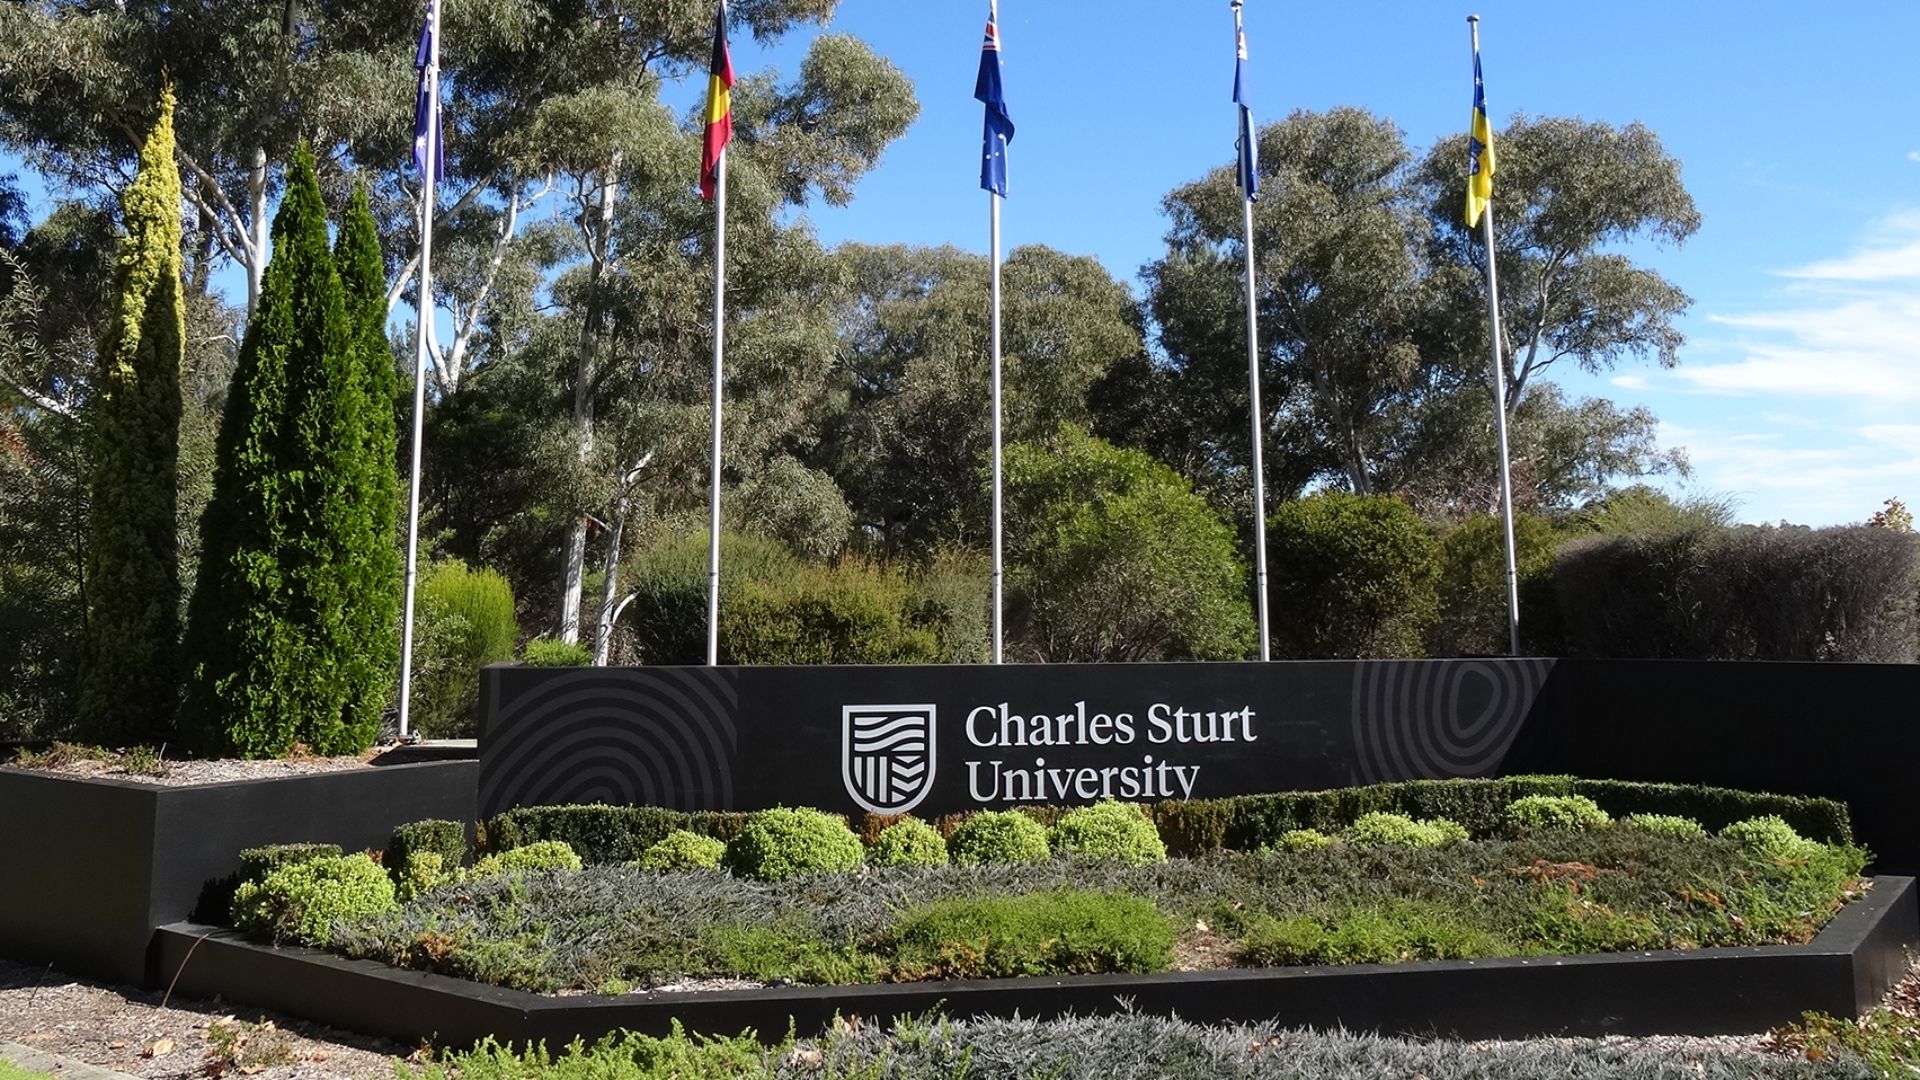 More than 16,000 offers made, demand increases for Charles Sturt in 2022 